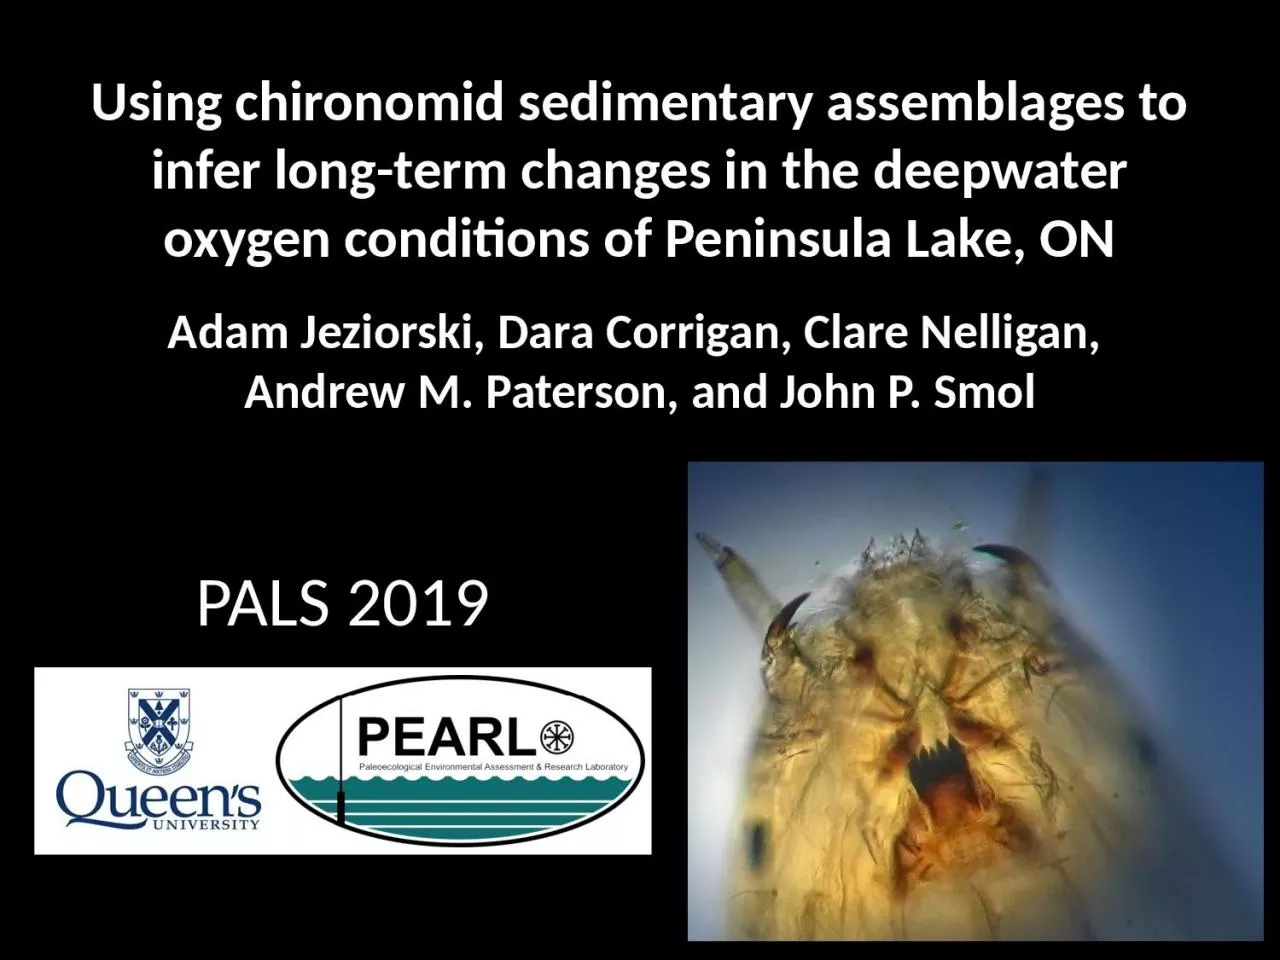 Using chironomid sedimentary assemblages to infer long-term changes in the deepwater oxygen